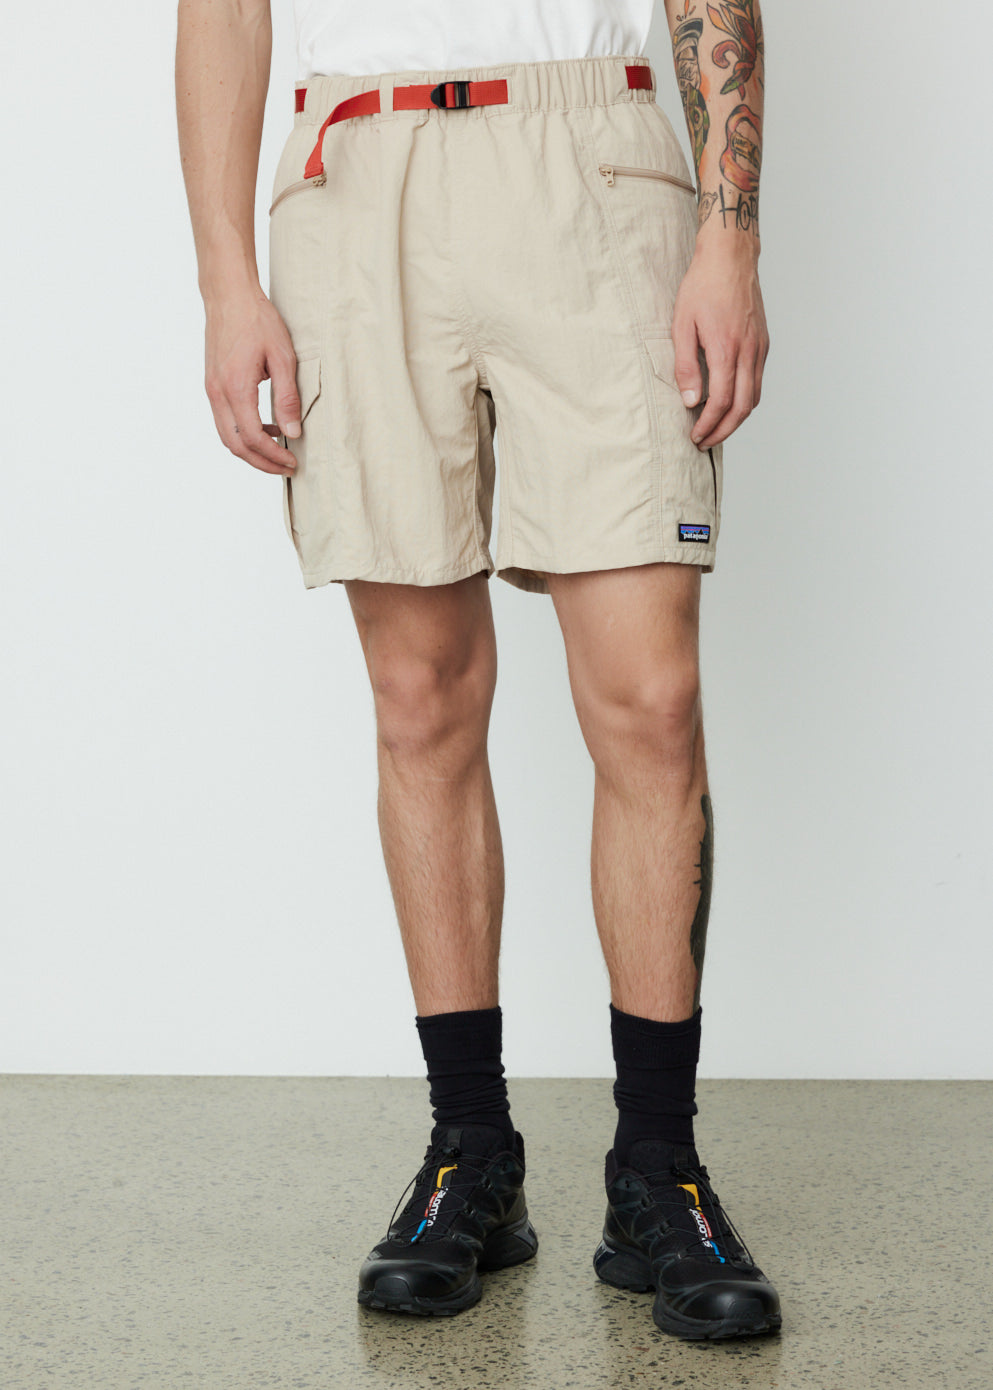 Outdoor Everyday Shorts 7"